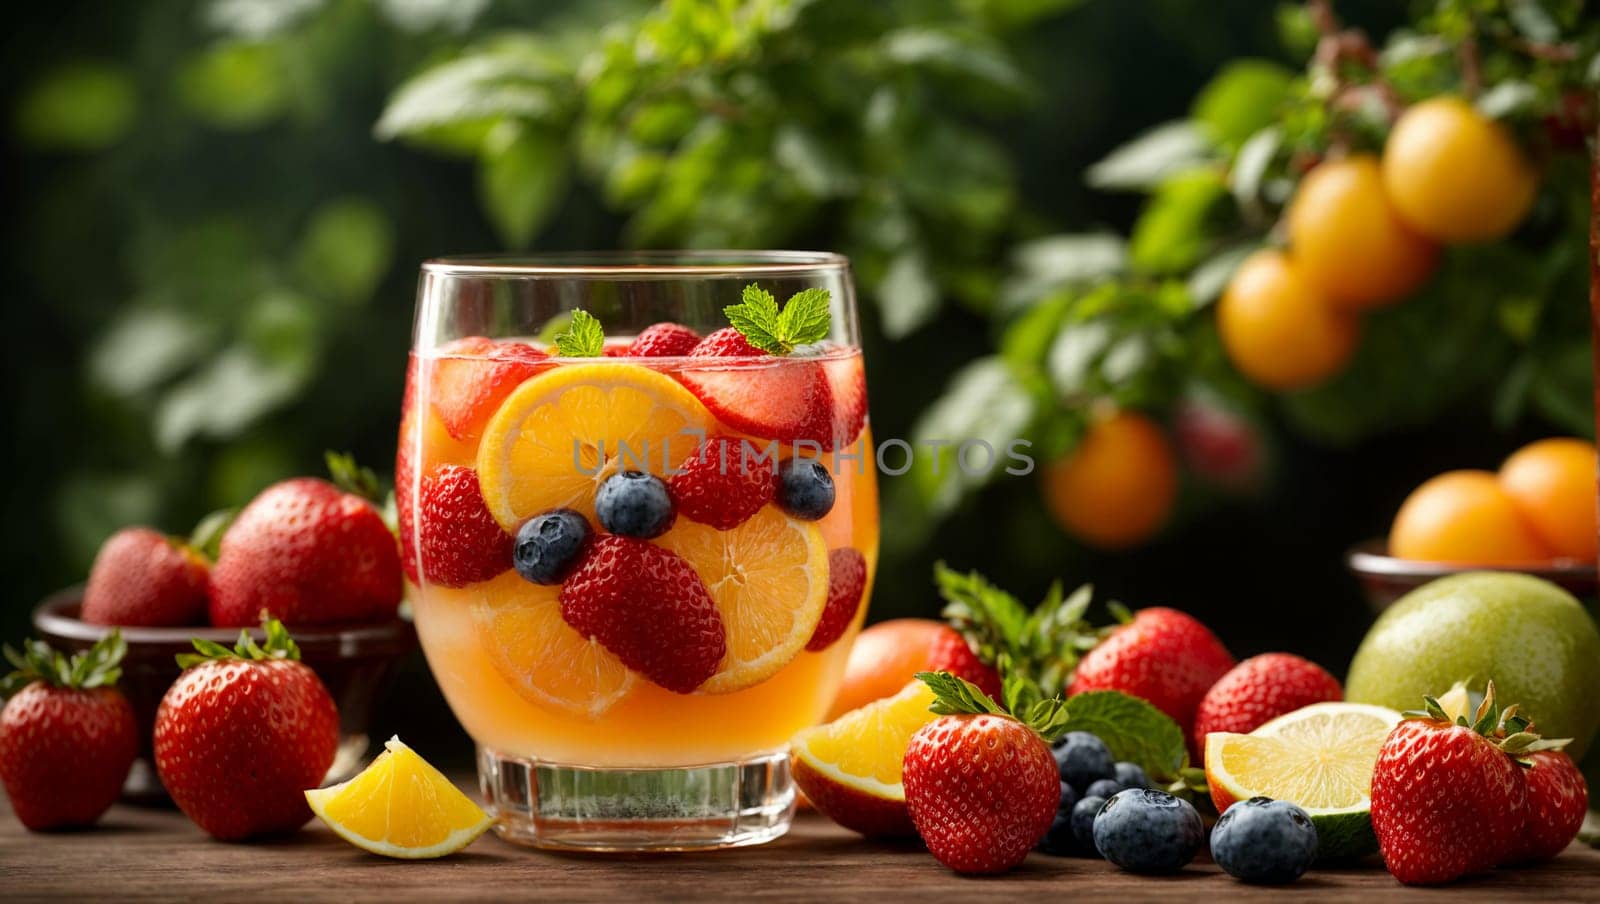 A fruit cocktail is a delicious drink made from fresh fruits and berries. by Севостьянов